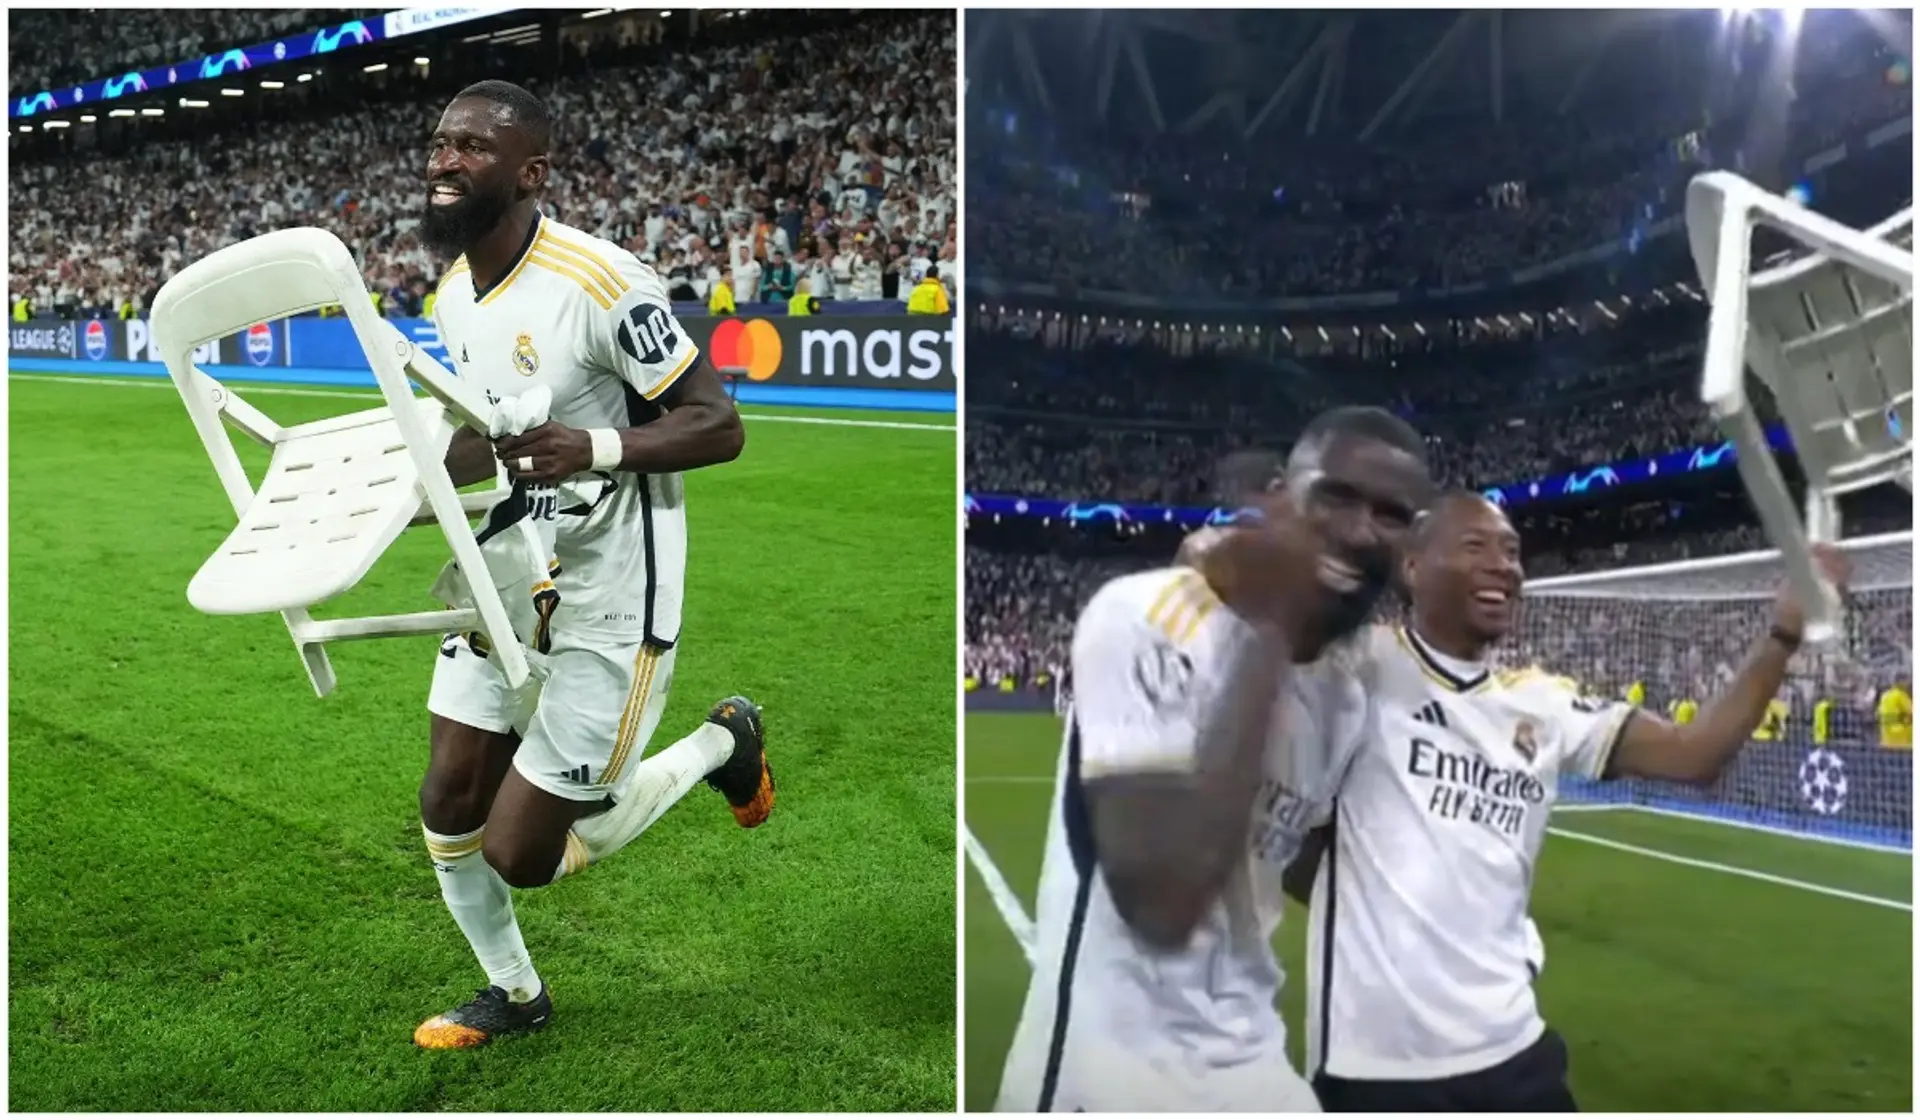 Why was Rüdiger celebrating with chair after the Bayern win? Not only emotions - there's a whole story here